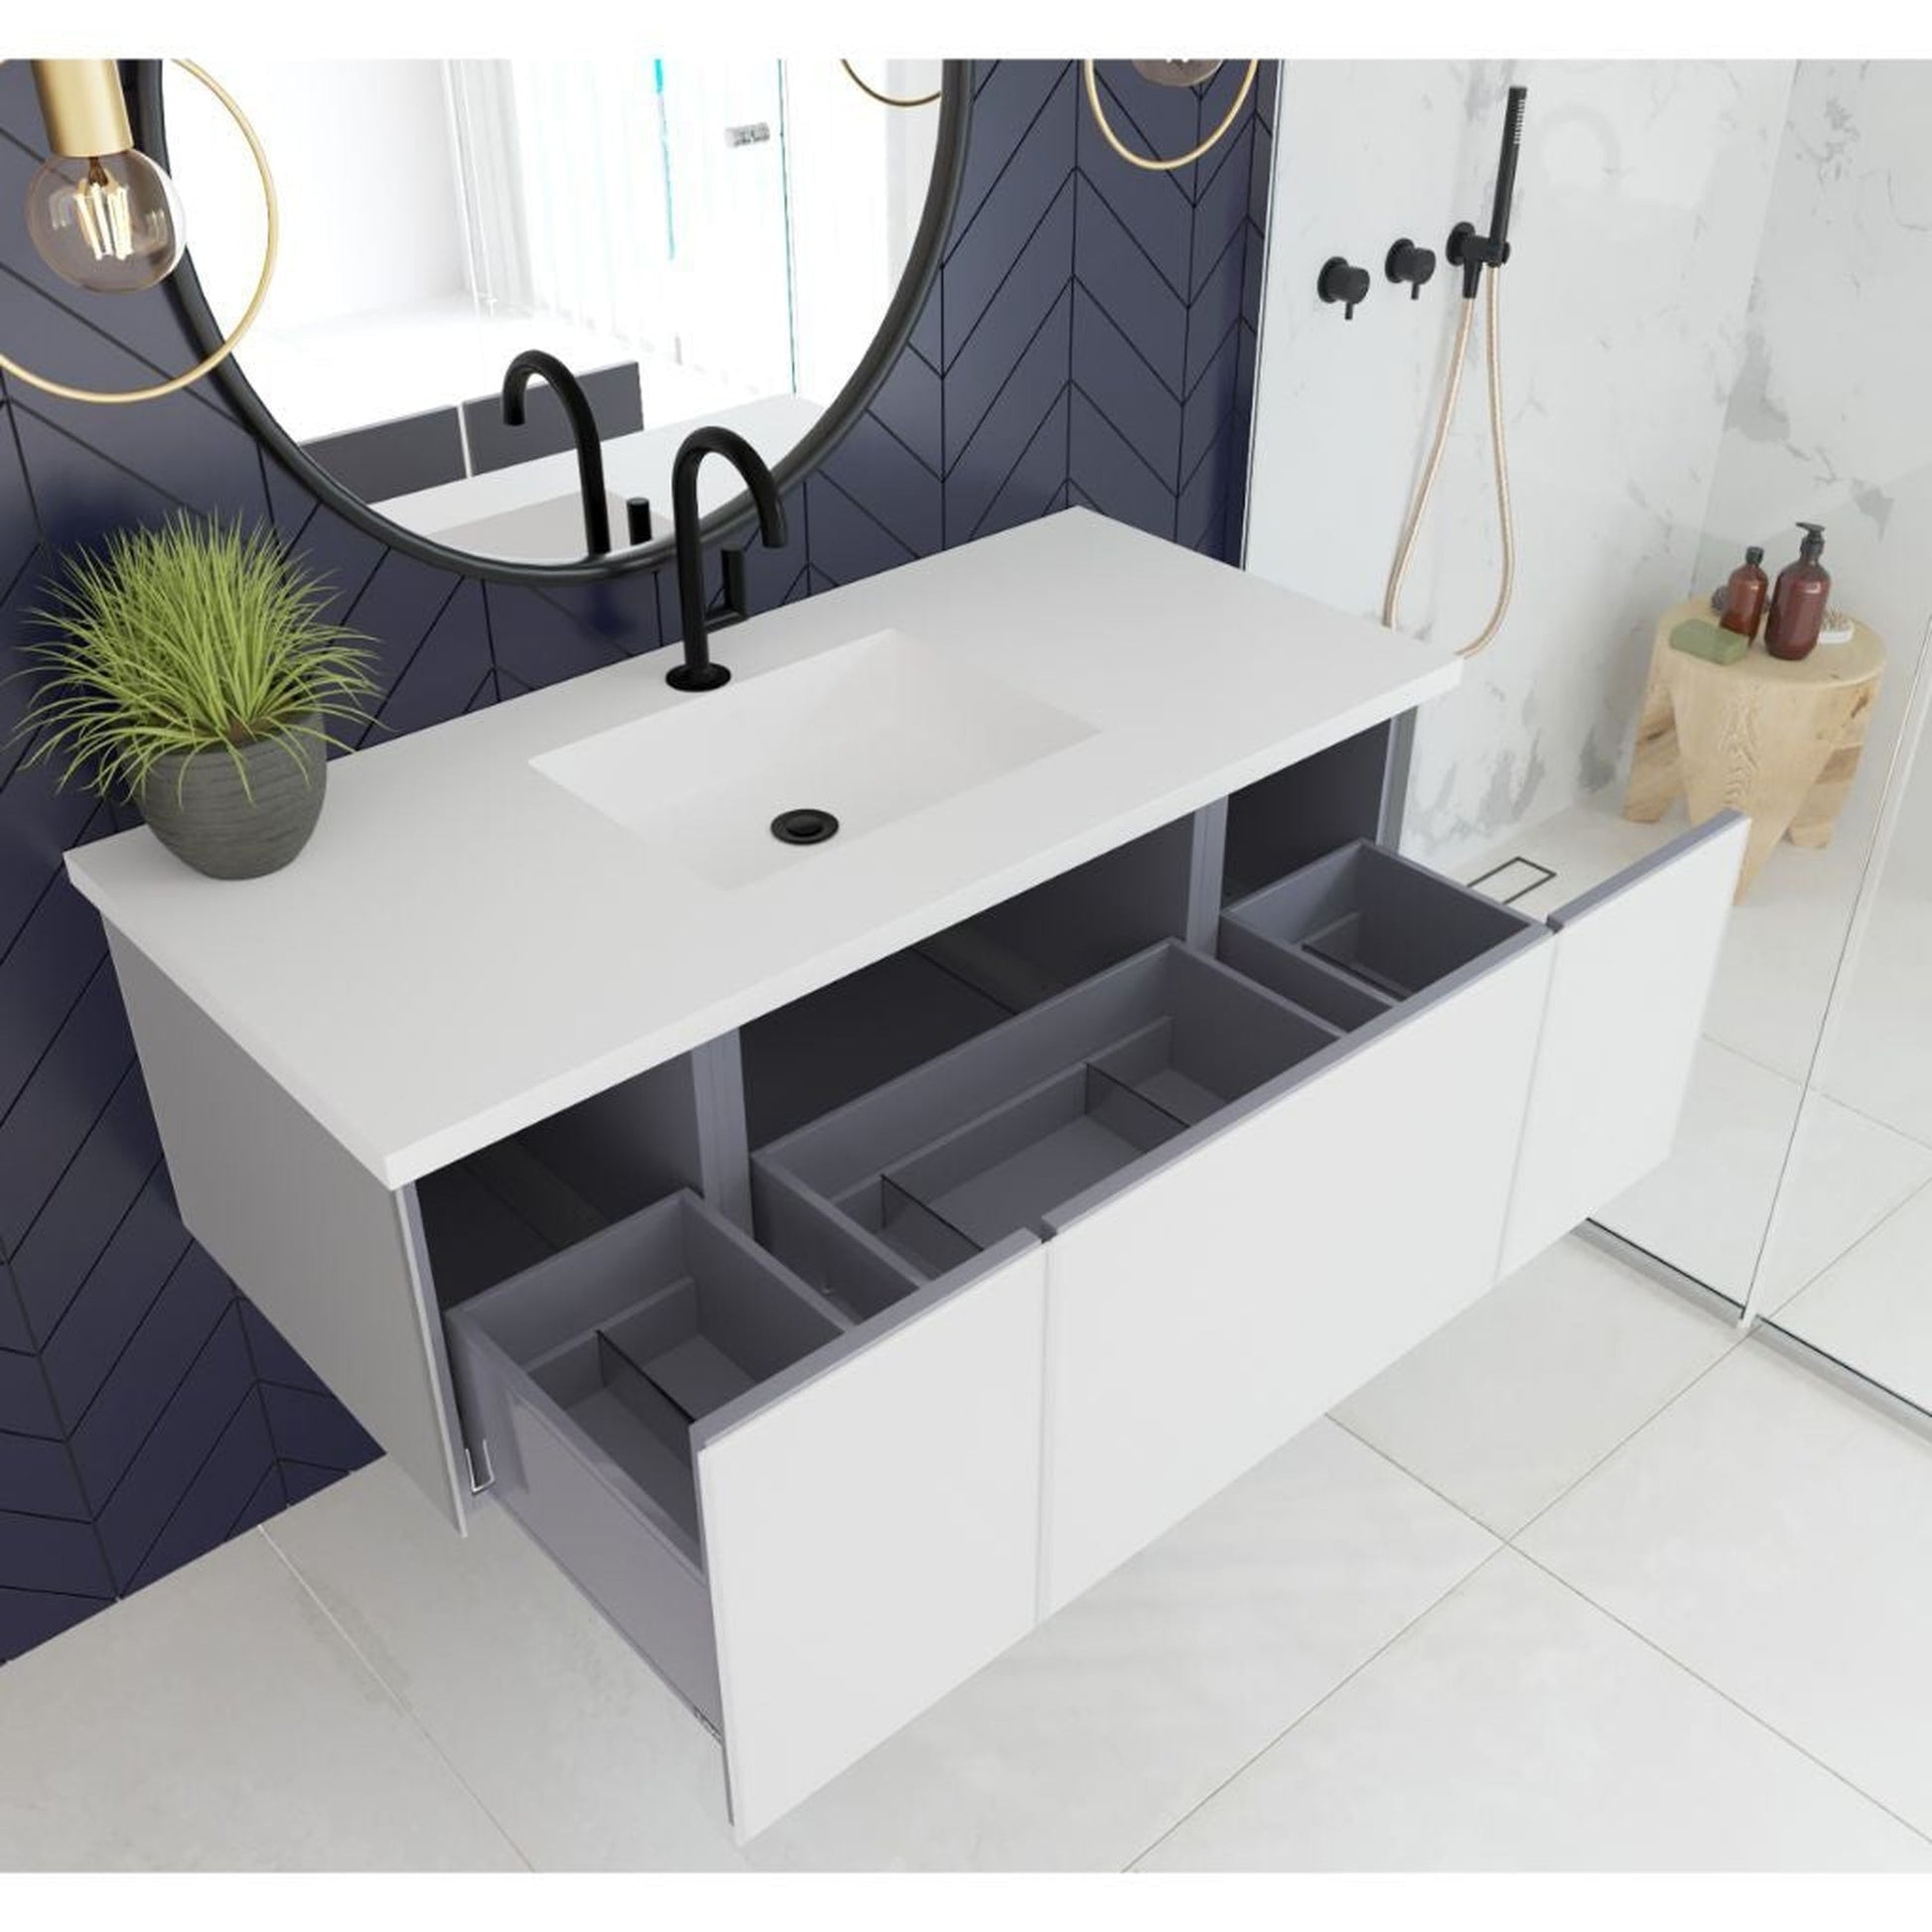 Laviva Vitri 48" Cloud White Vanity Base and Matte White Solid Surface Countertop With Integrated Sink